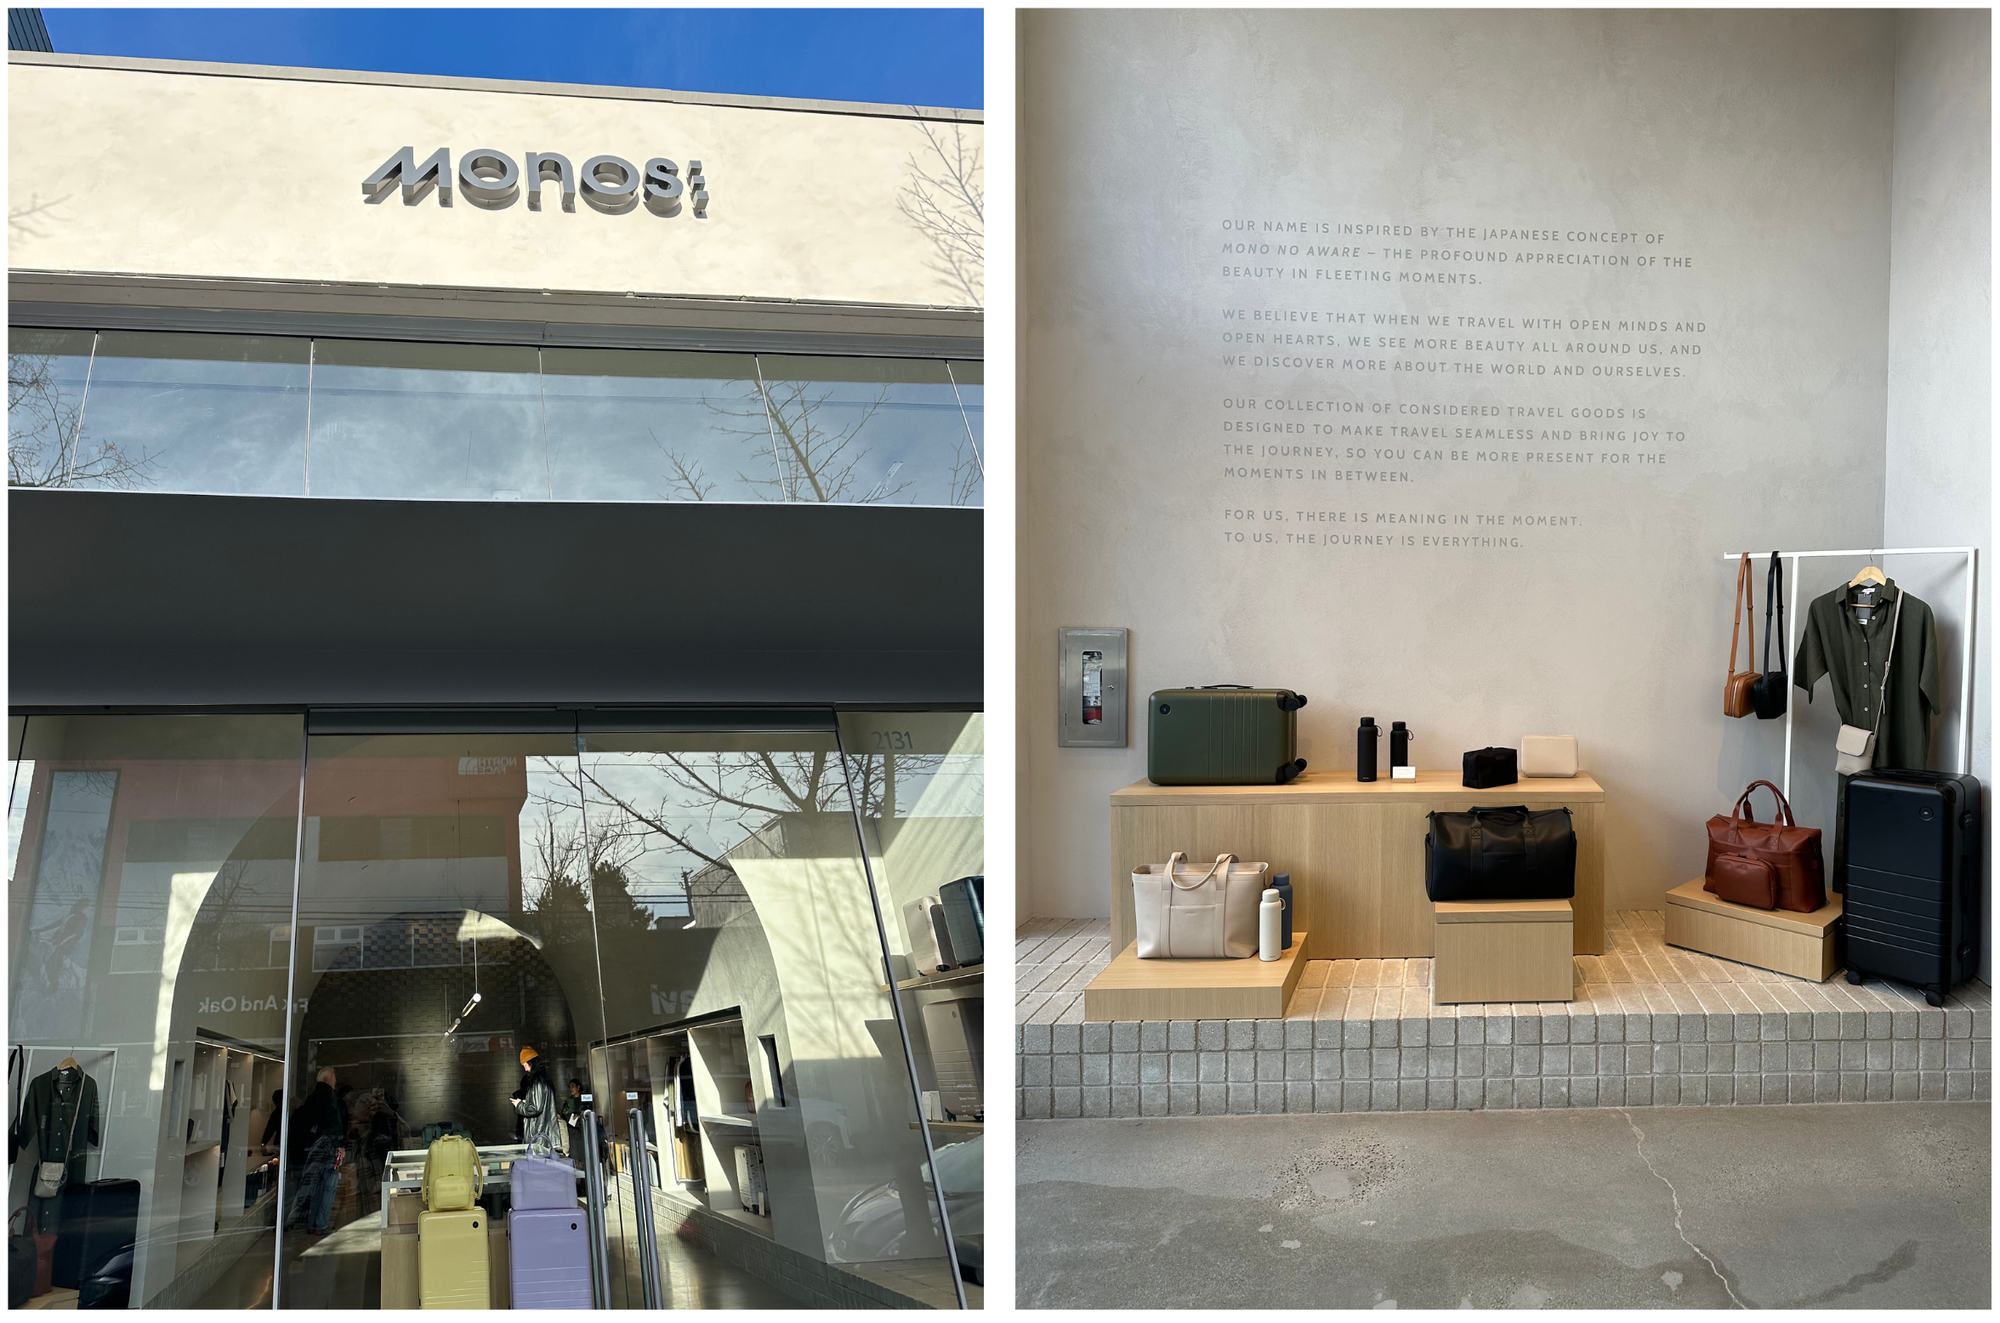 image of two pictures of monos luggage retail location inside and outside